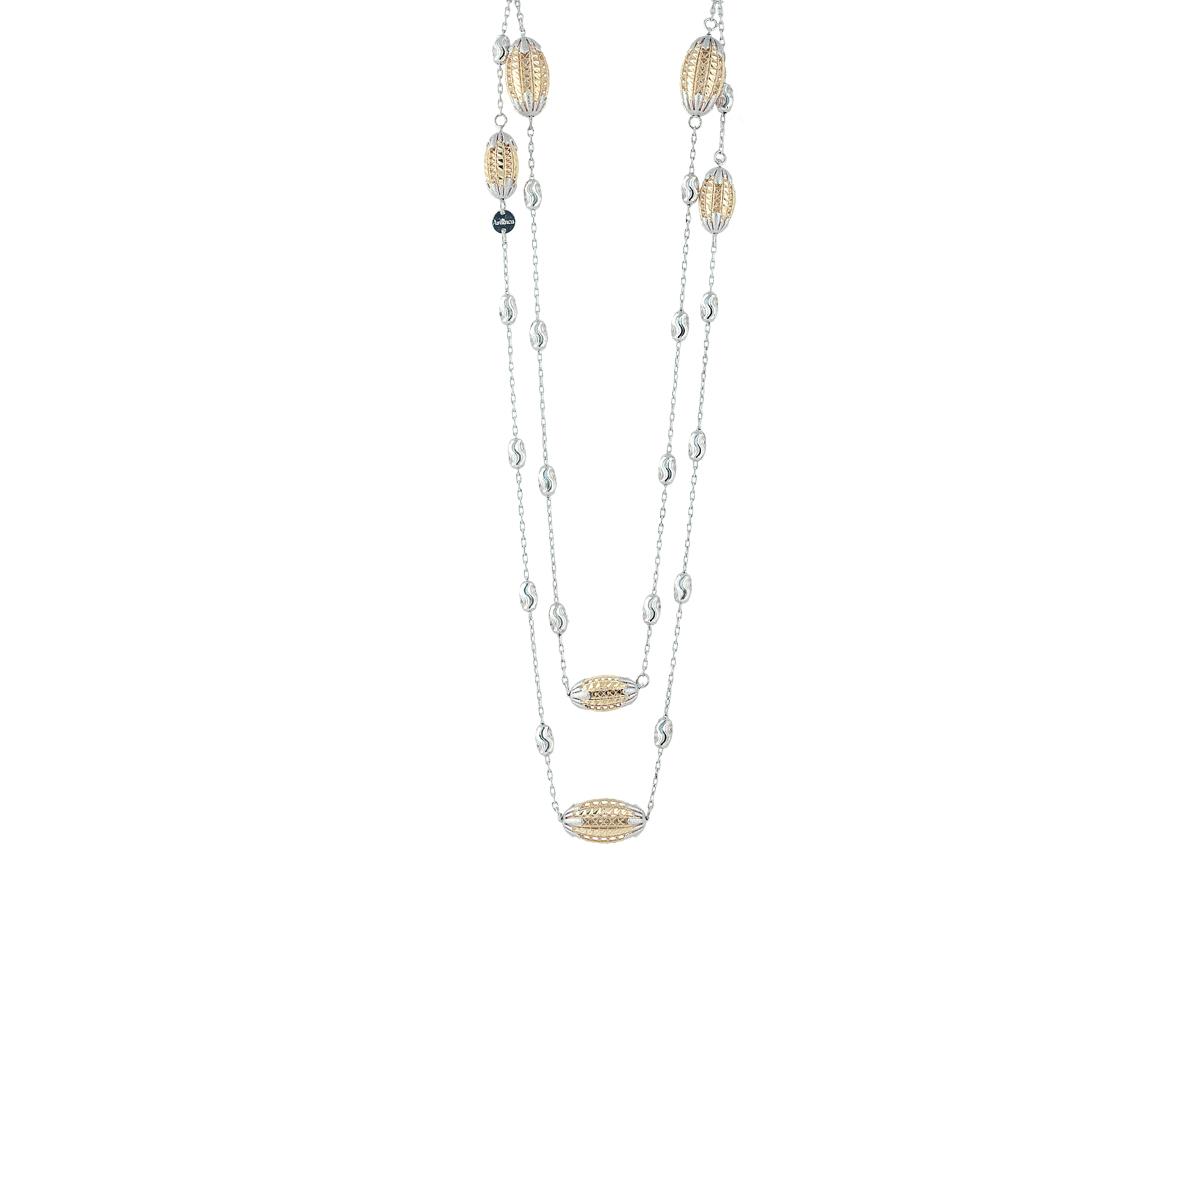 Chanel necklace in gold and rhodium-plated 925 silver - ZCL979-LN